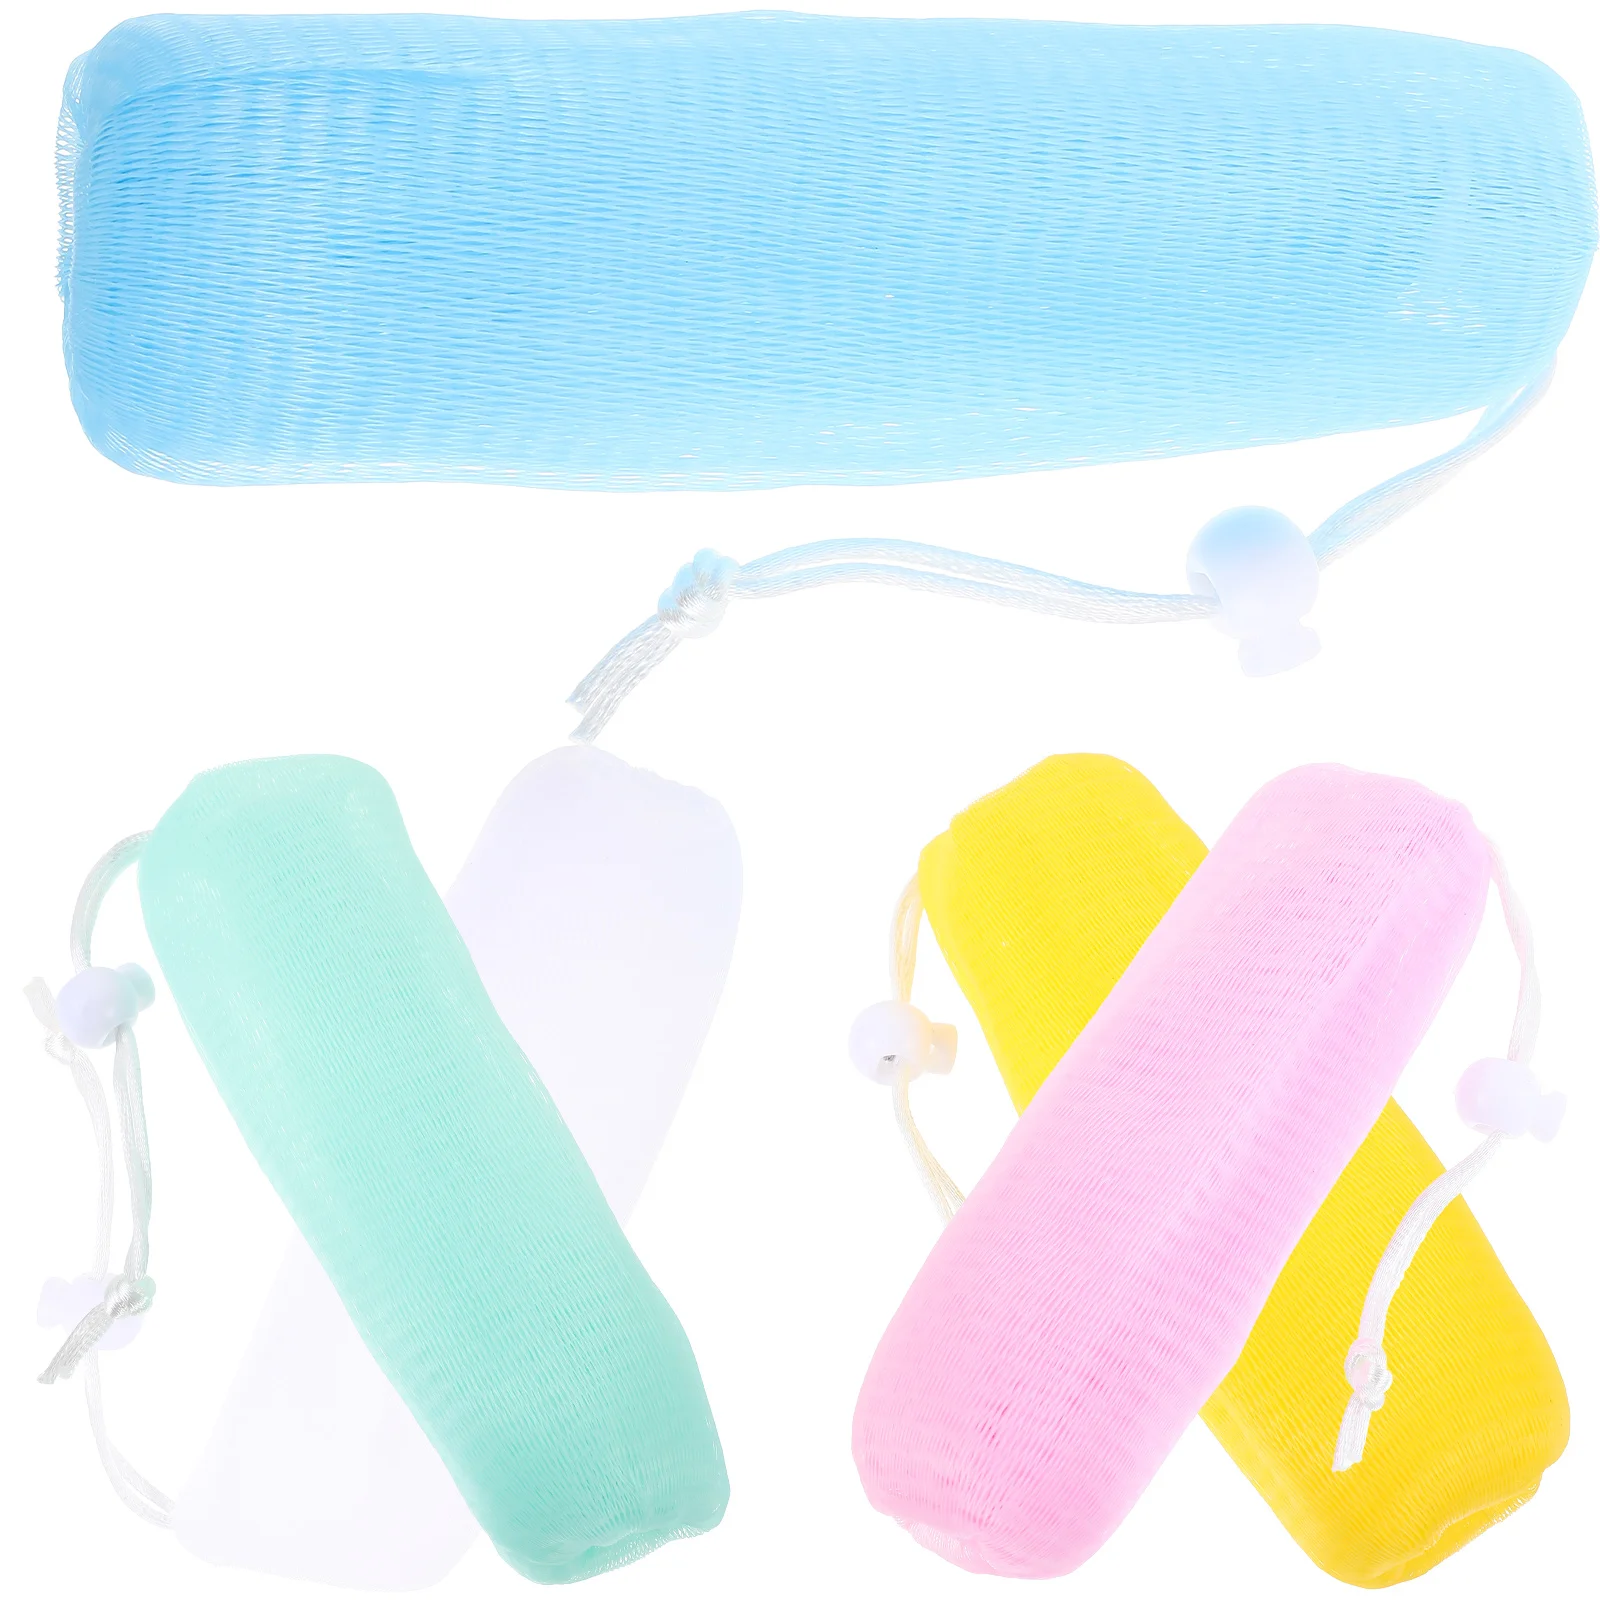 

5Pcs Mesh Pouchs Exfoliating Saver Bag Neat for Body Cleaning Tool for Bathroom Hotel Home and Travel ( Assorted Colors )